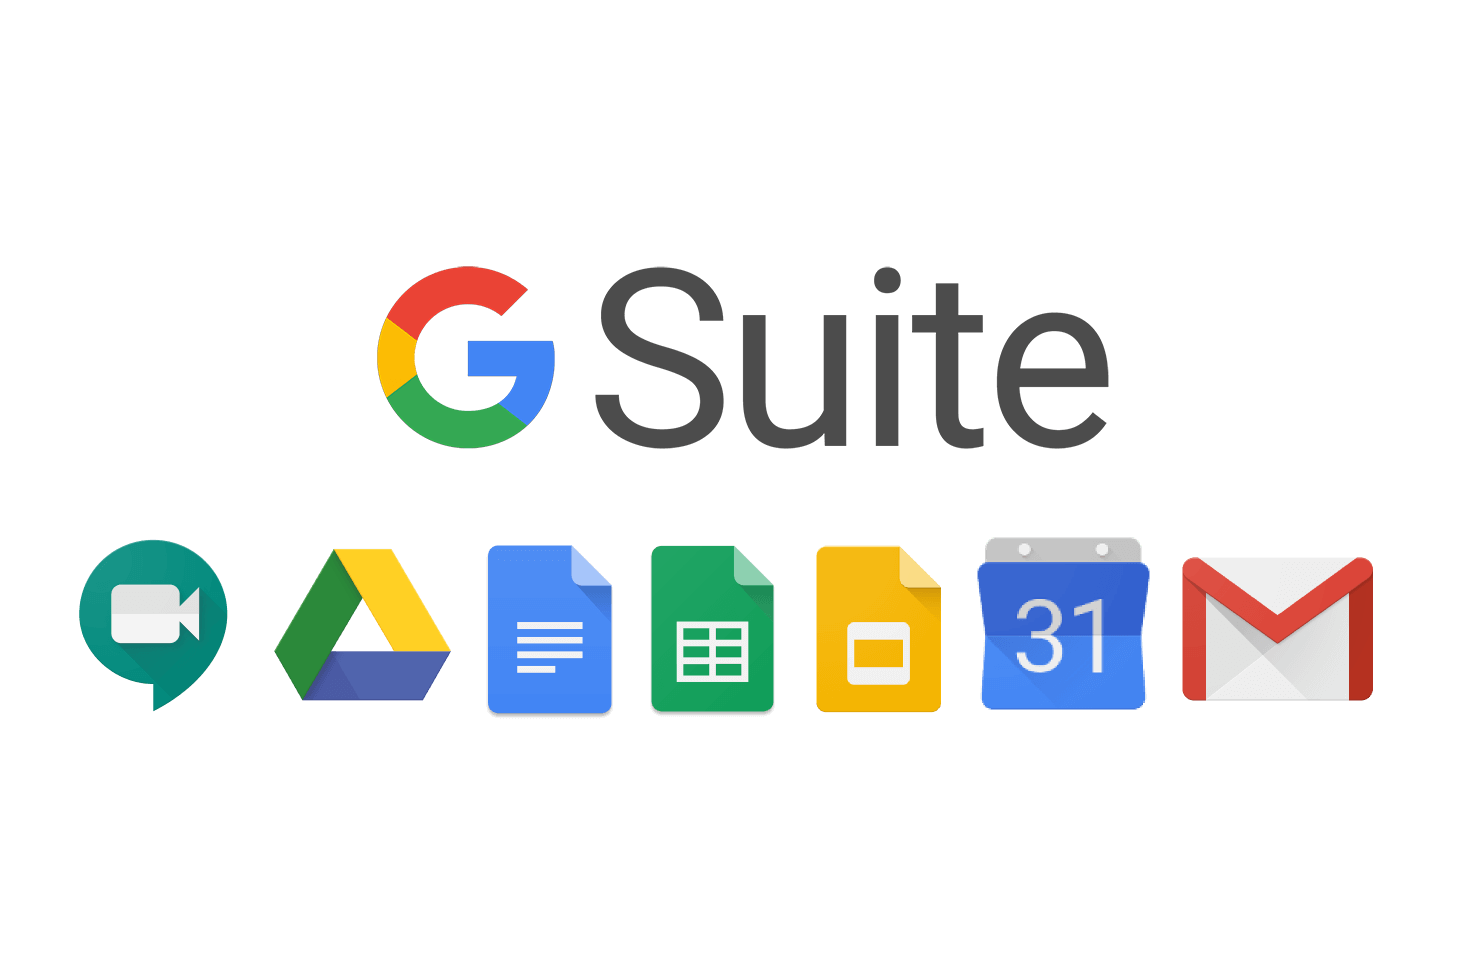 GSuite banner 1 - Hire Remote Employees in No Time